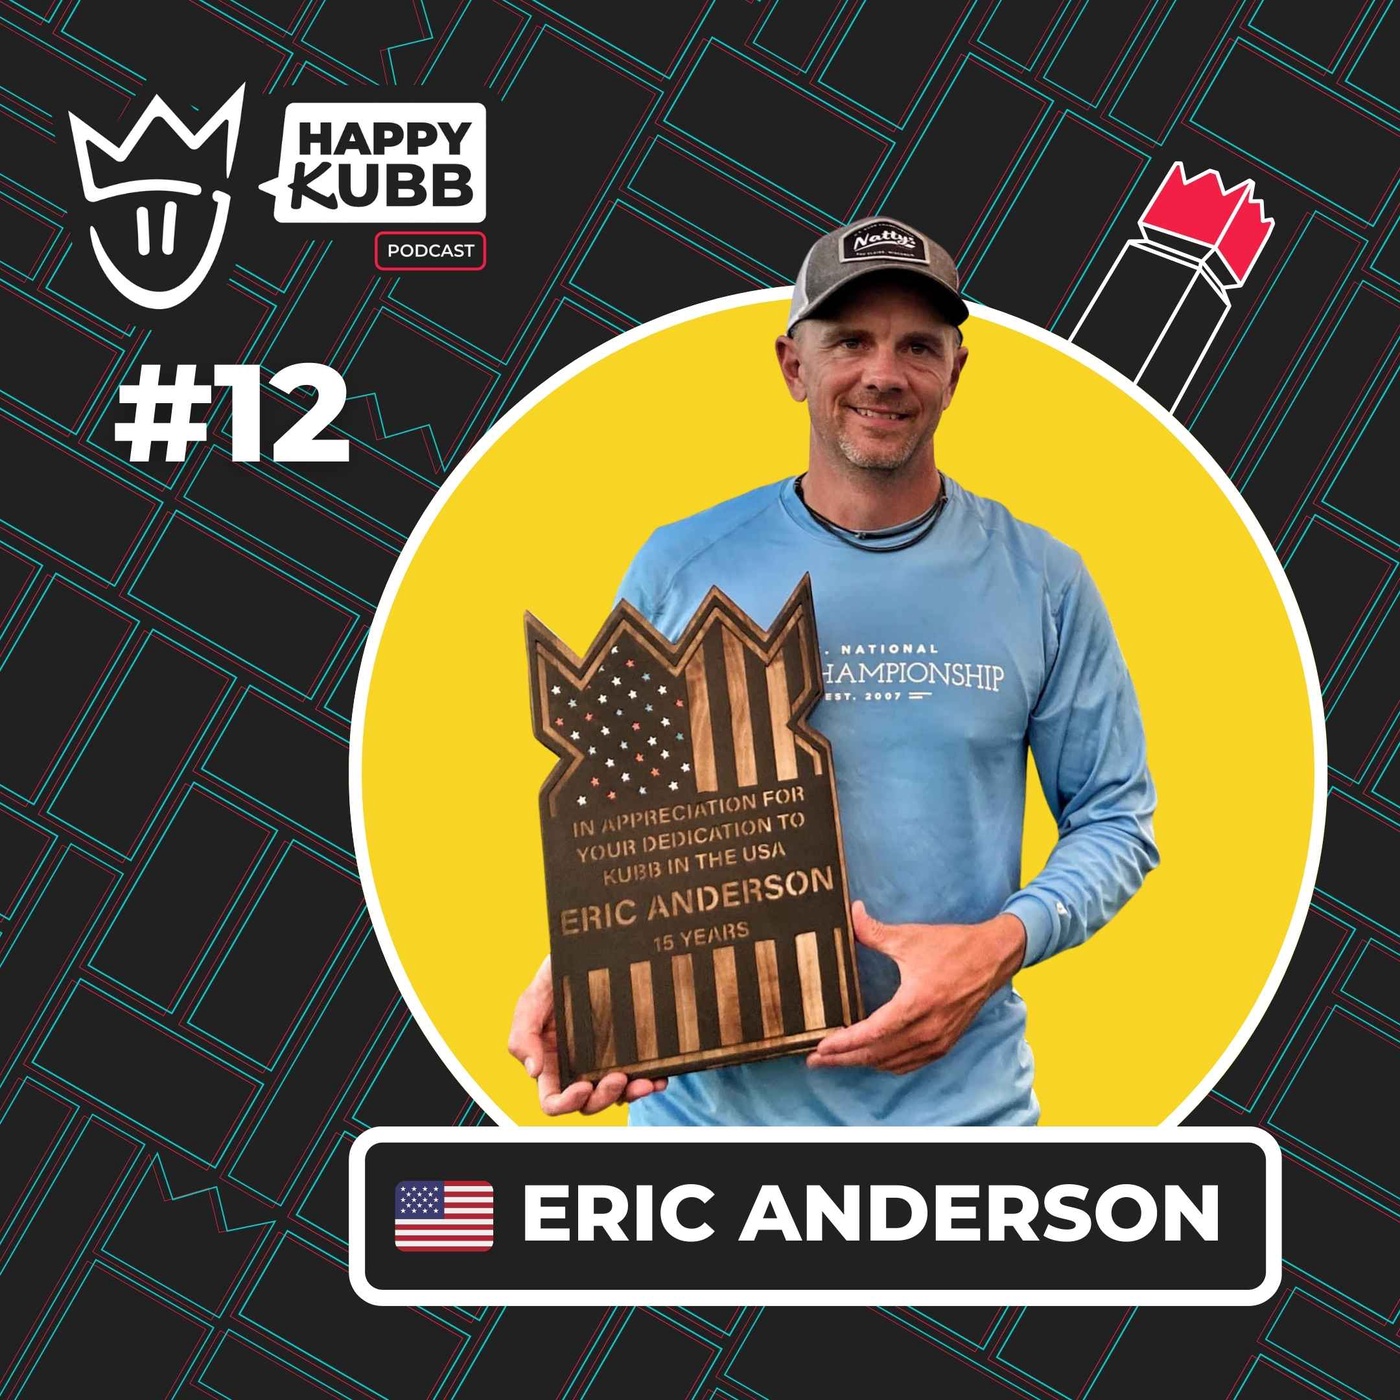 Eric Anderson | from a single Kubb set to US National Kubb Championship organizer